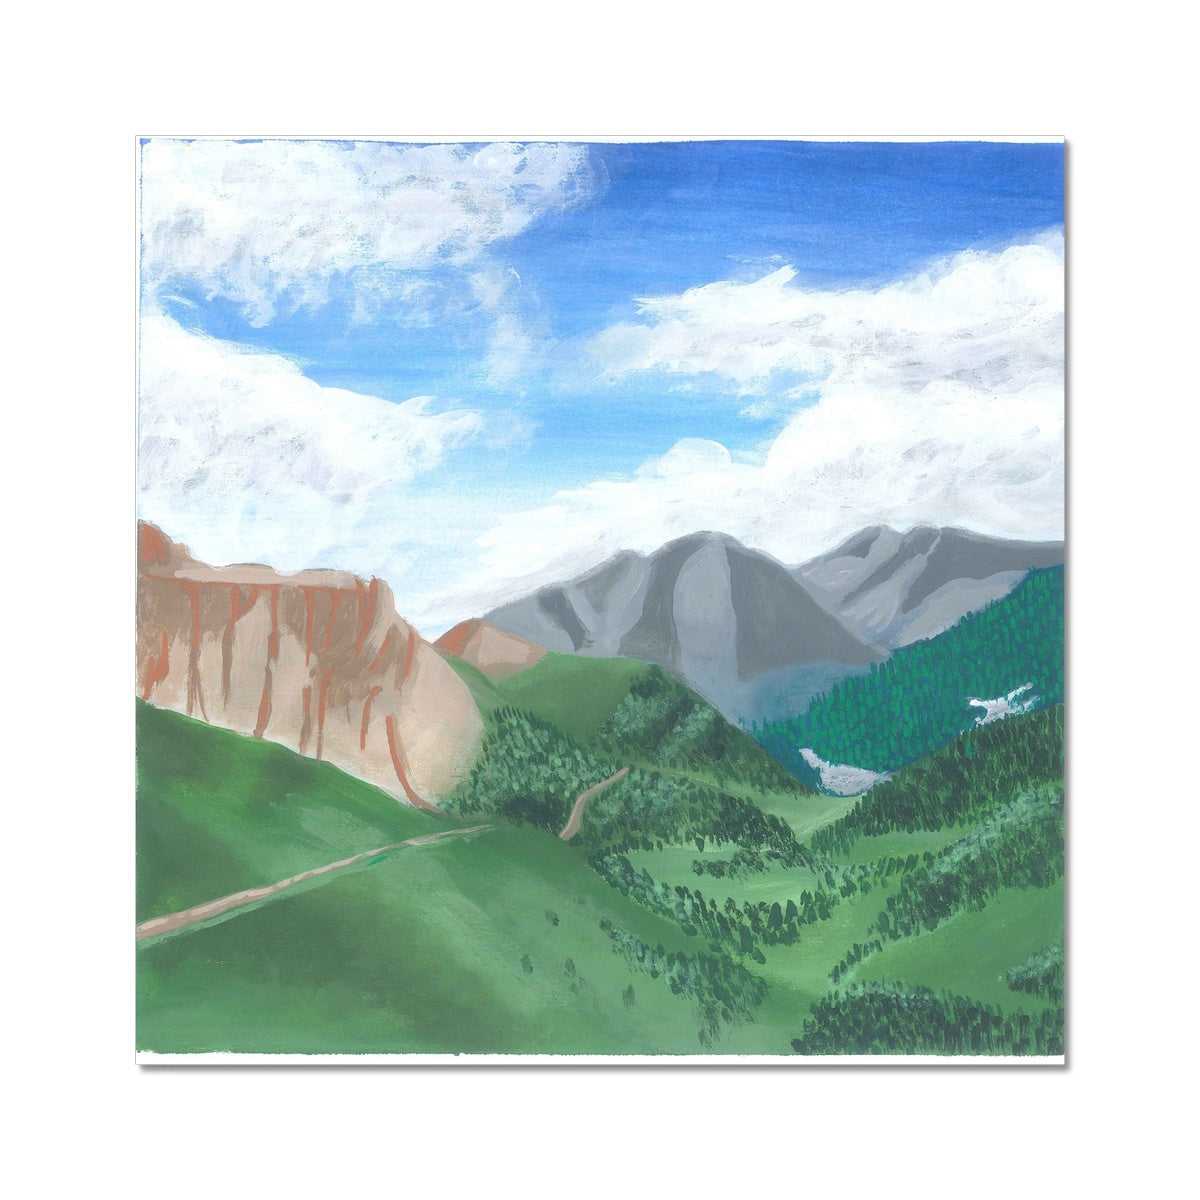 Echoes in the Alps - Bright Day Over Green Valleys and Majestic Mountains Fine Art Print - earth.fm